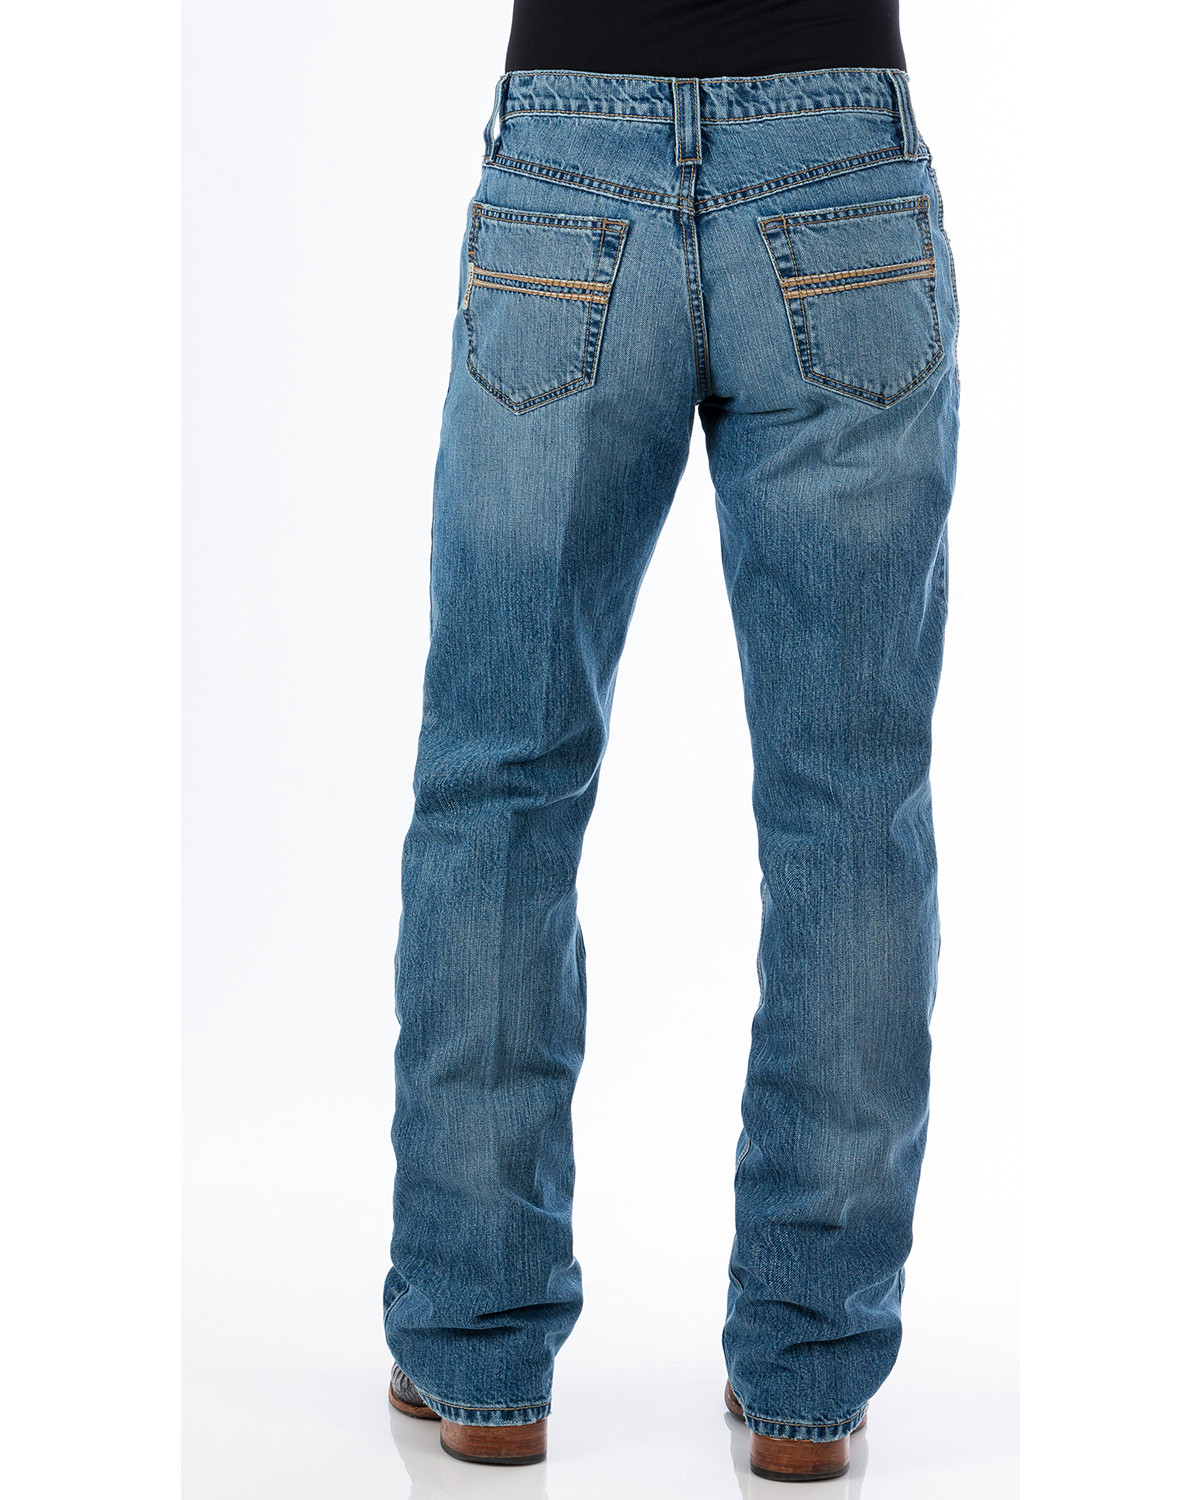 Cinch Men's Carter 2.0 Light Stonewash Relaxed Fit Bootcut Jeans